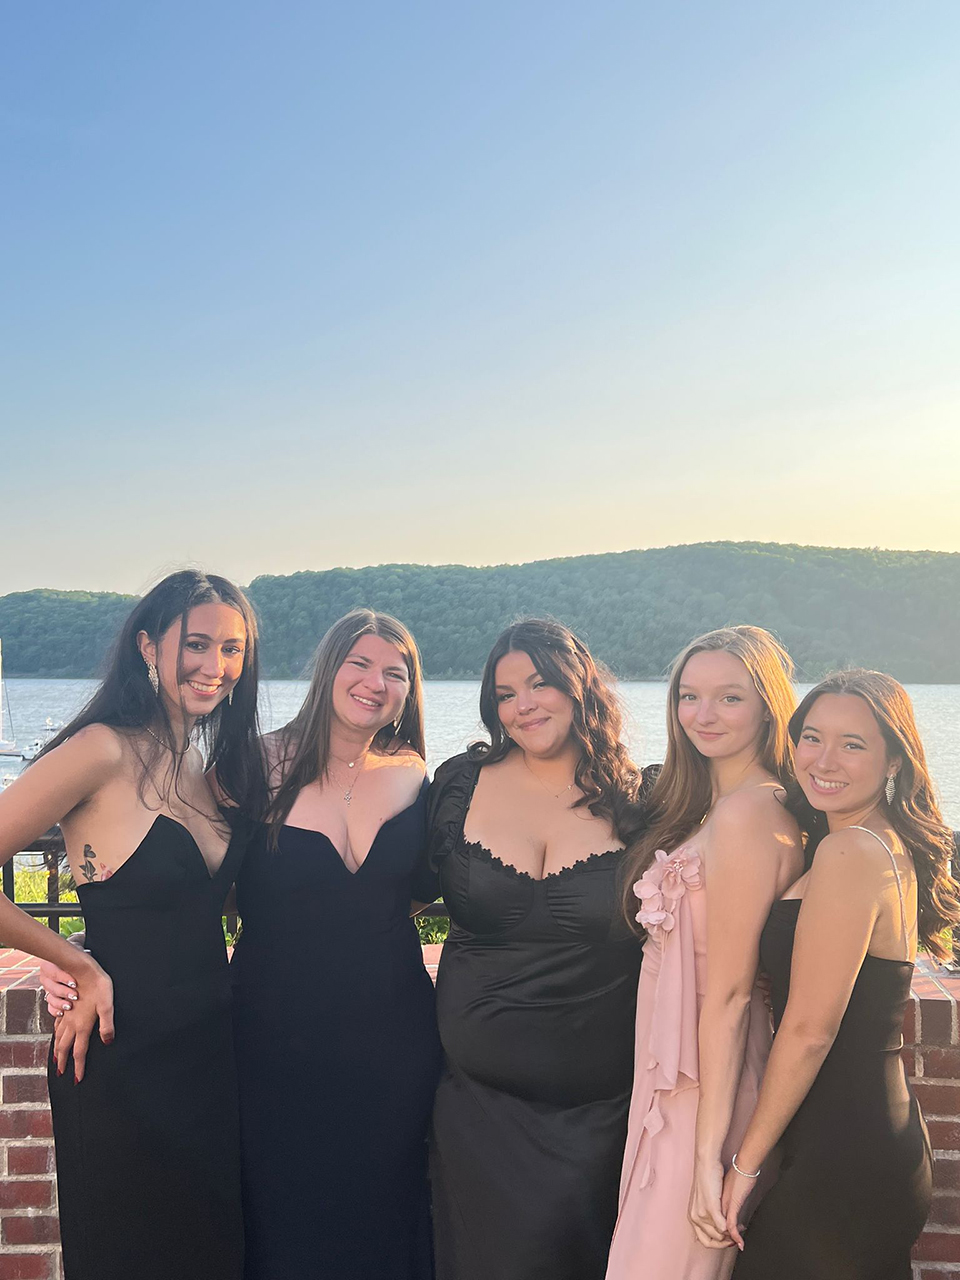 A group of girls wear prom dresses and pose for a photo together.